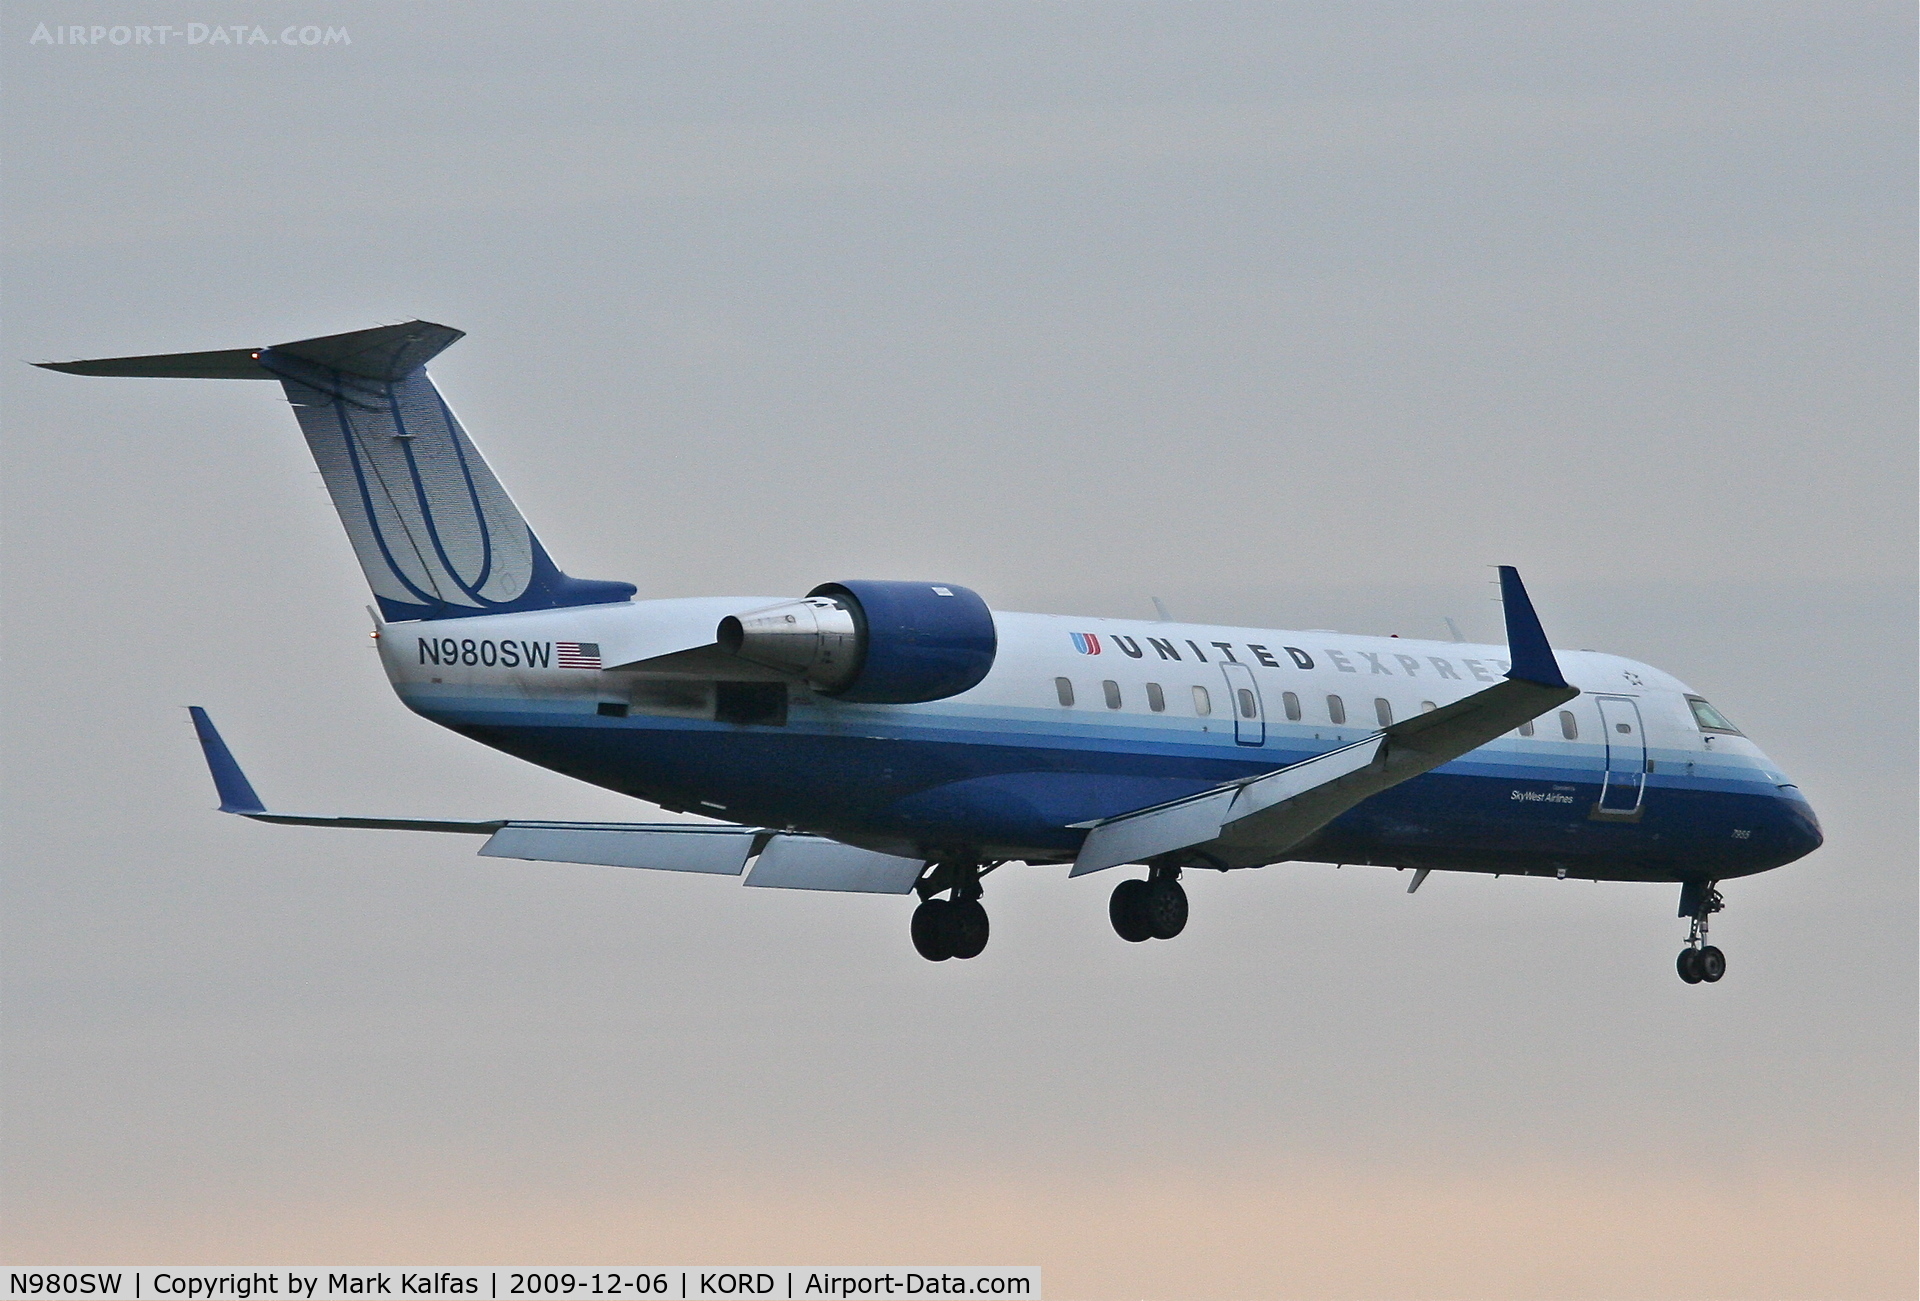 N980SW, 2004 Bombardier CRJ-200ER (CL-600-2B19) C/N 7955, SkyWest Airlines Bombardier CL-600-2B19, SKW6090 arriving from KMLI on 22R.